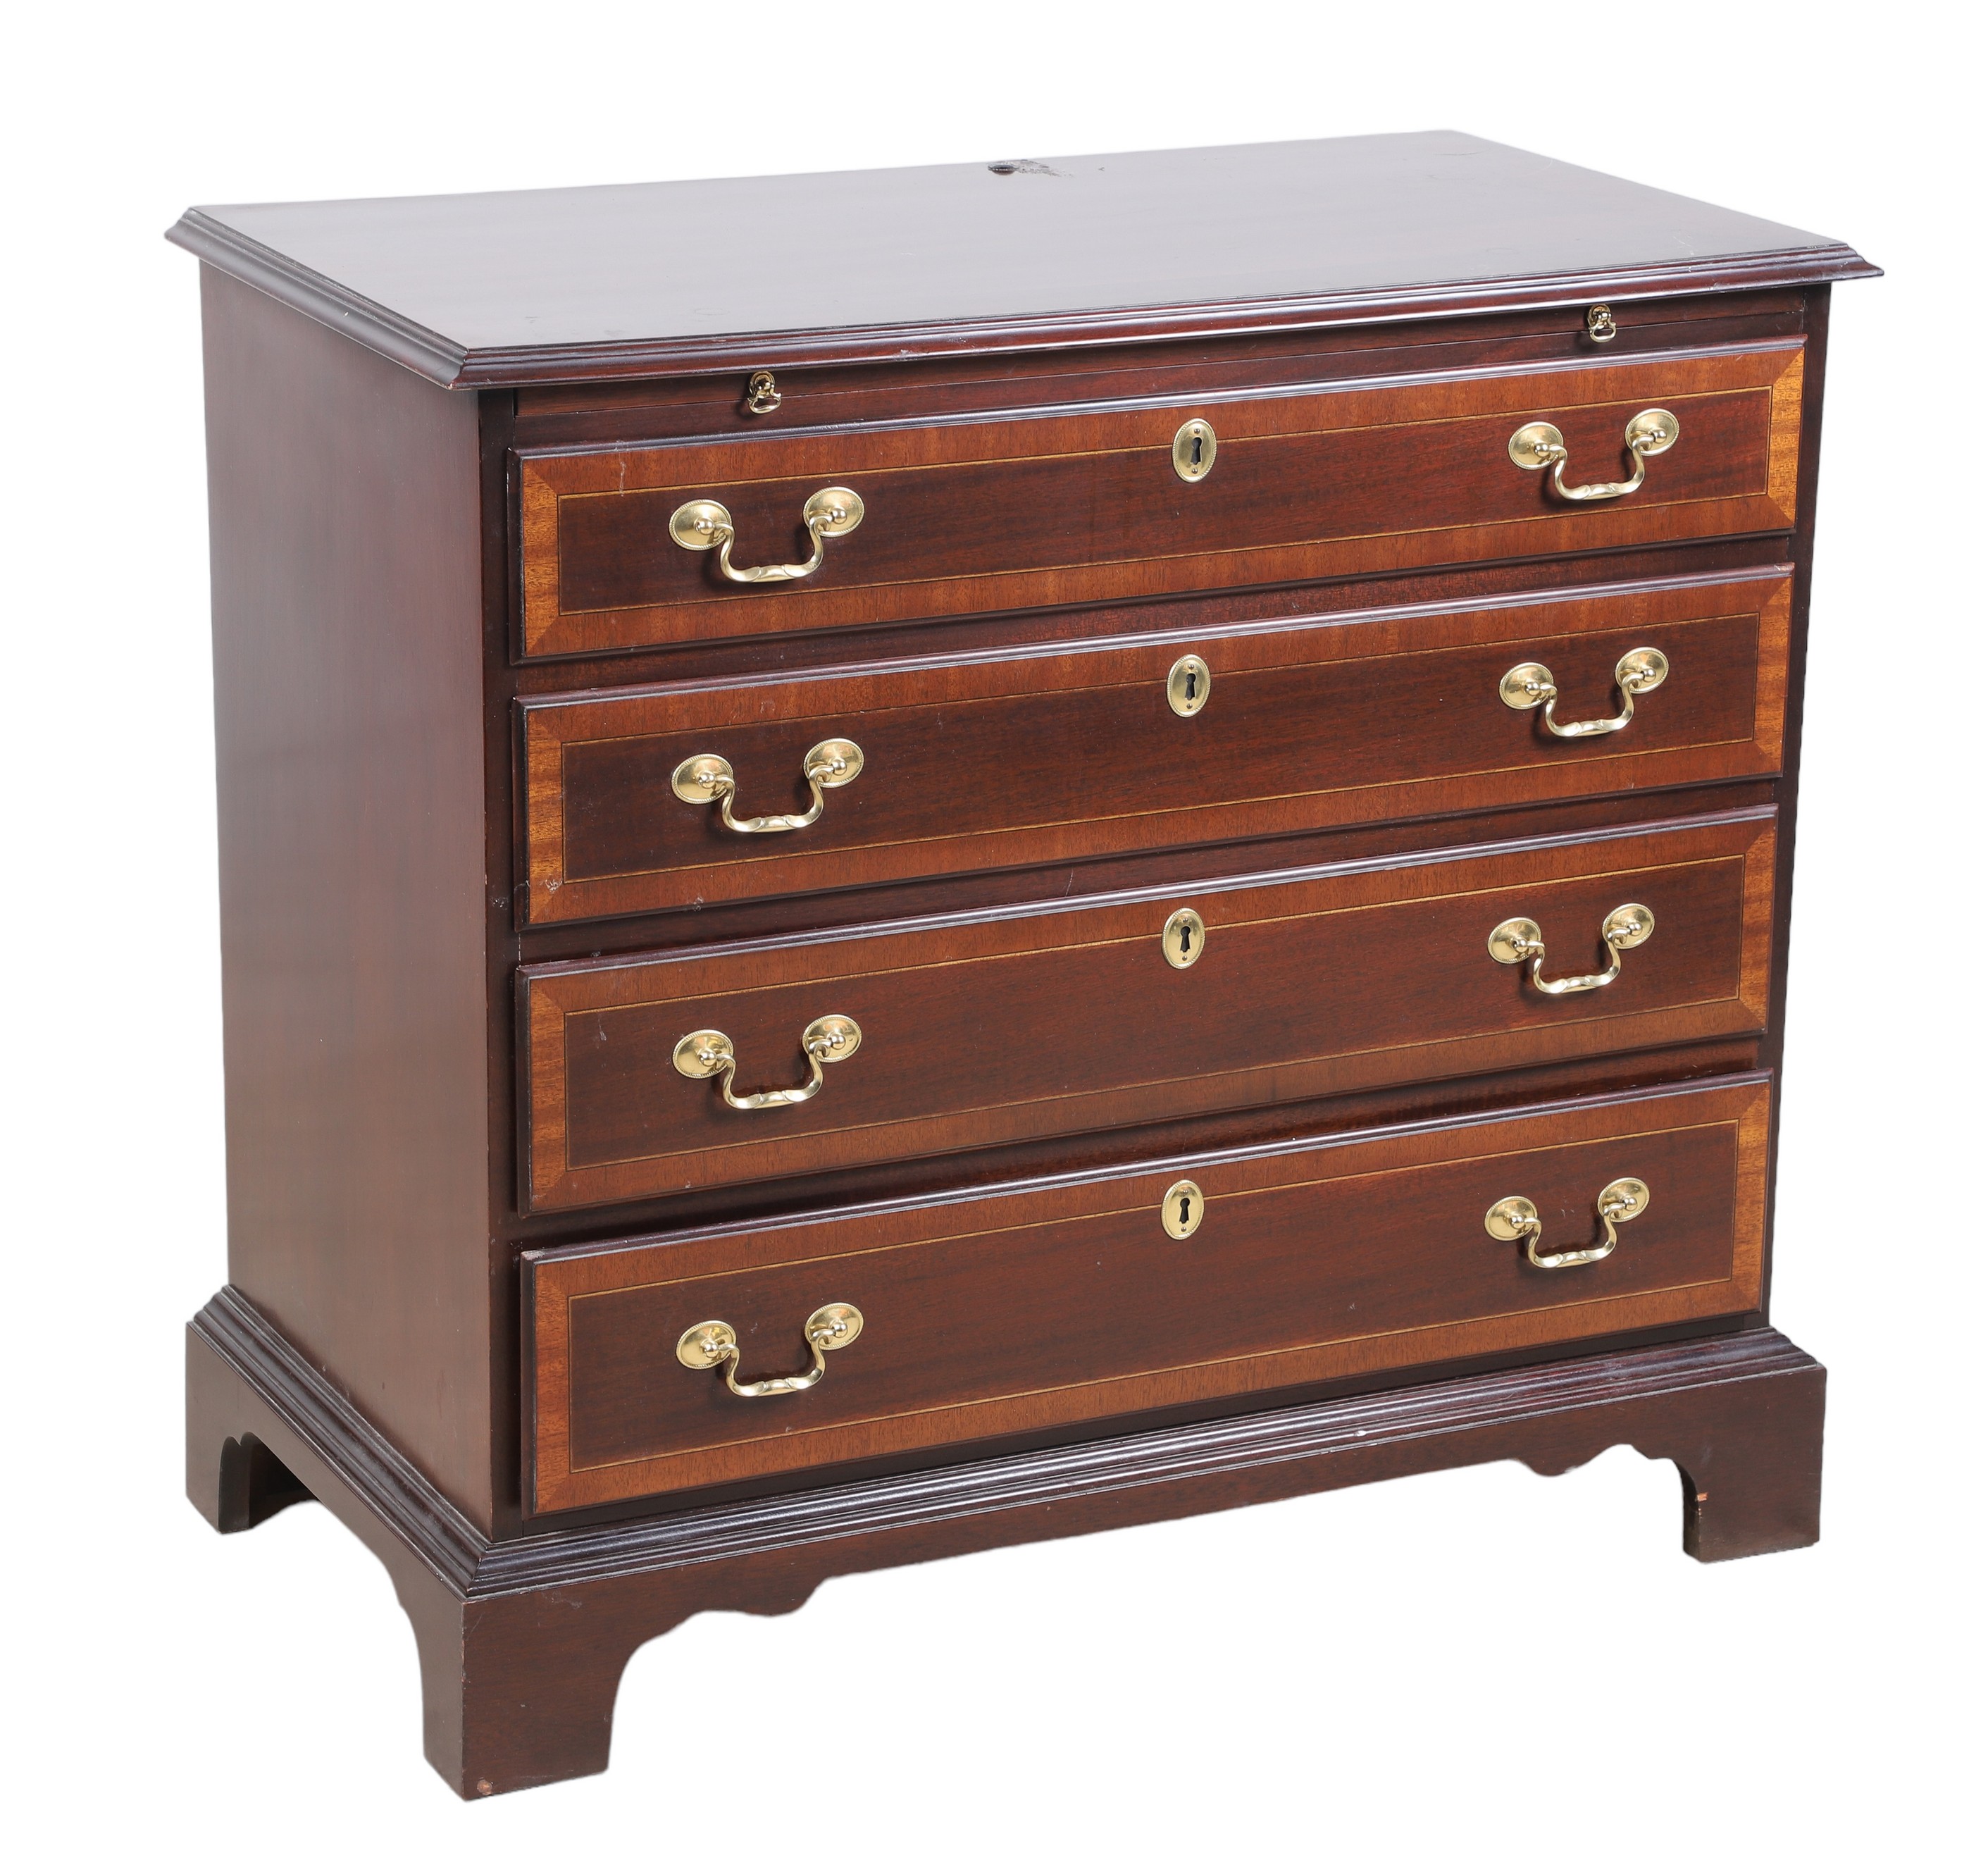 Councill mahogany banded chest of drawers,